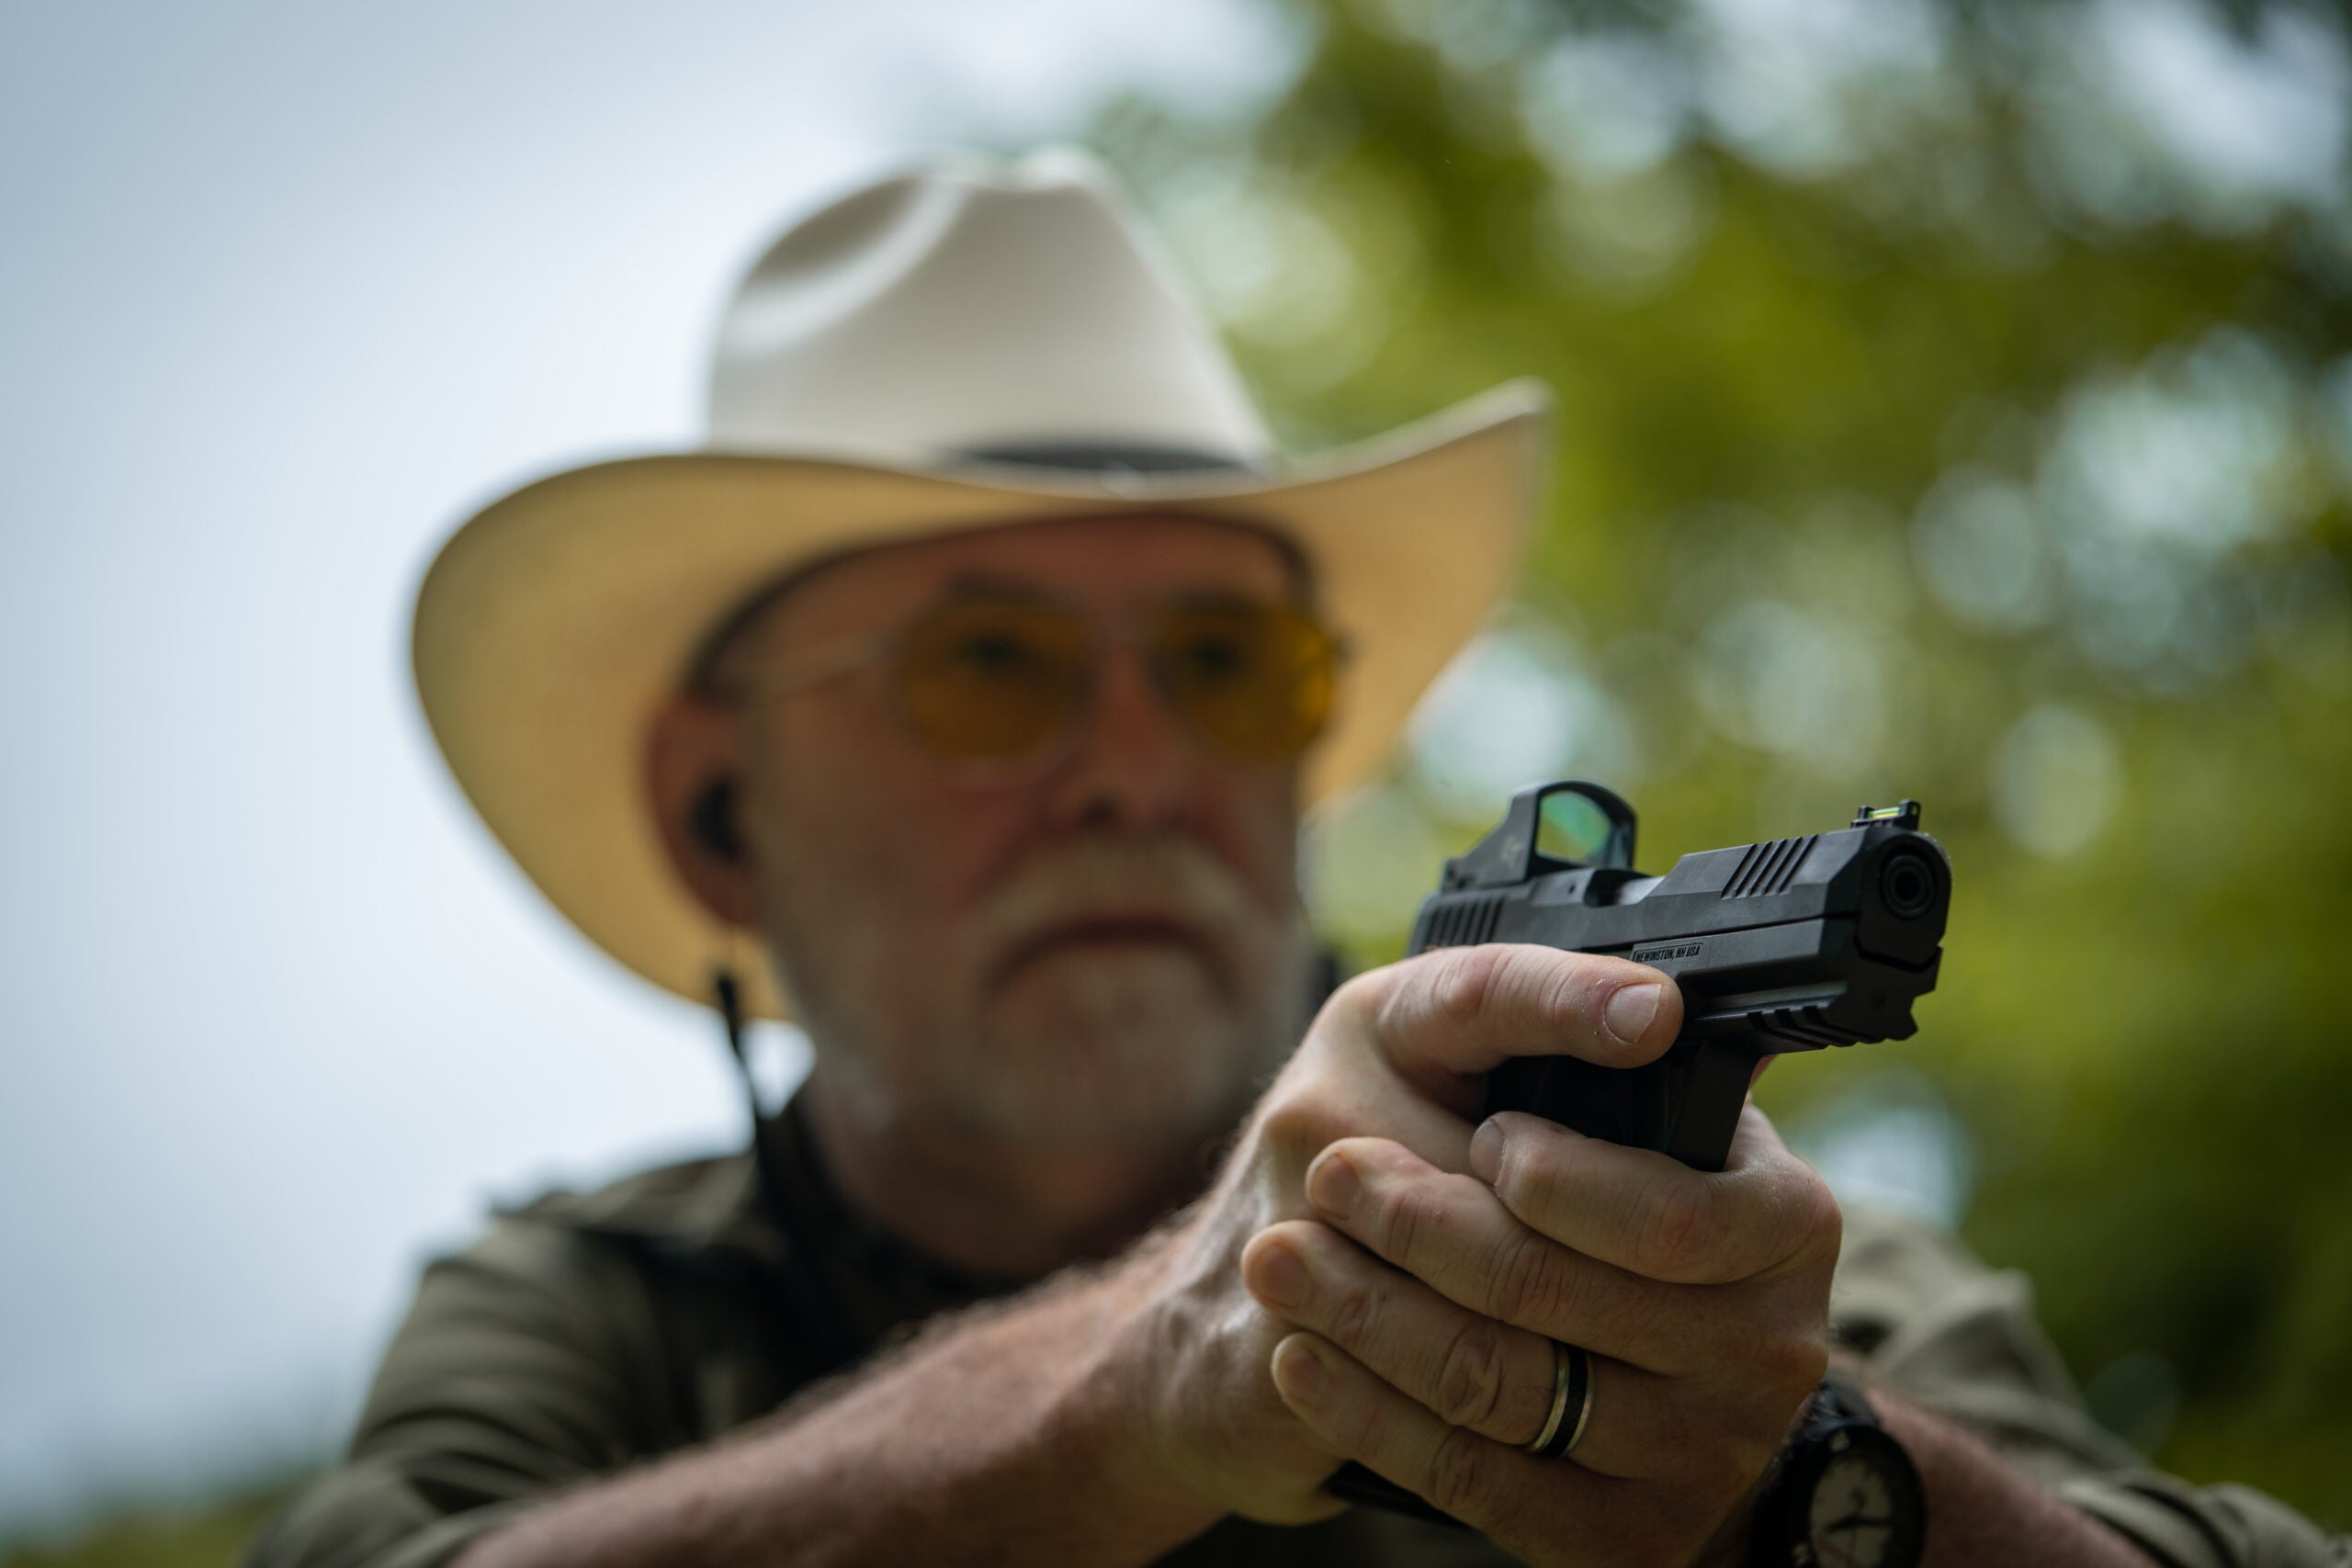 The author gets ready to point and shoot the Sig Sauer P322.